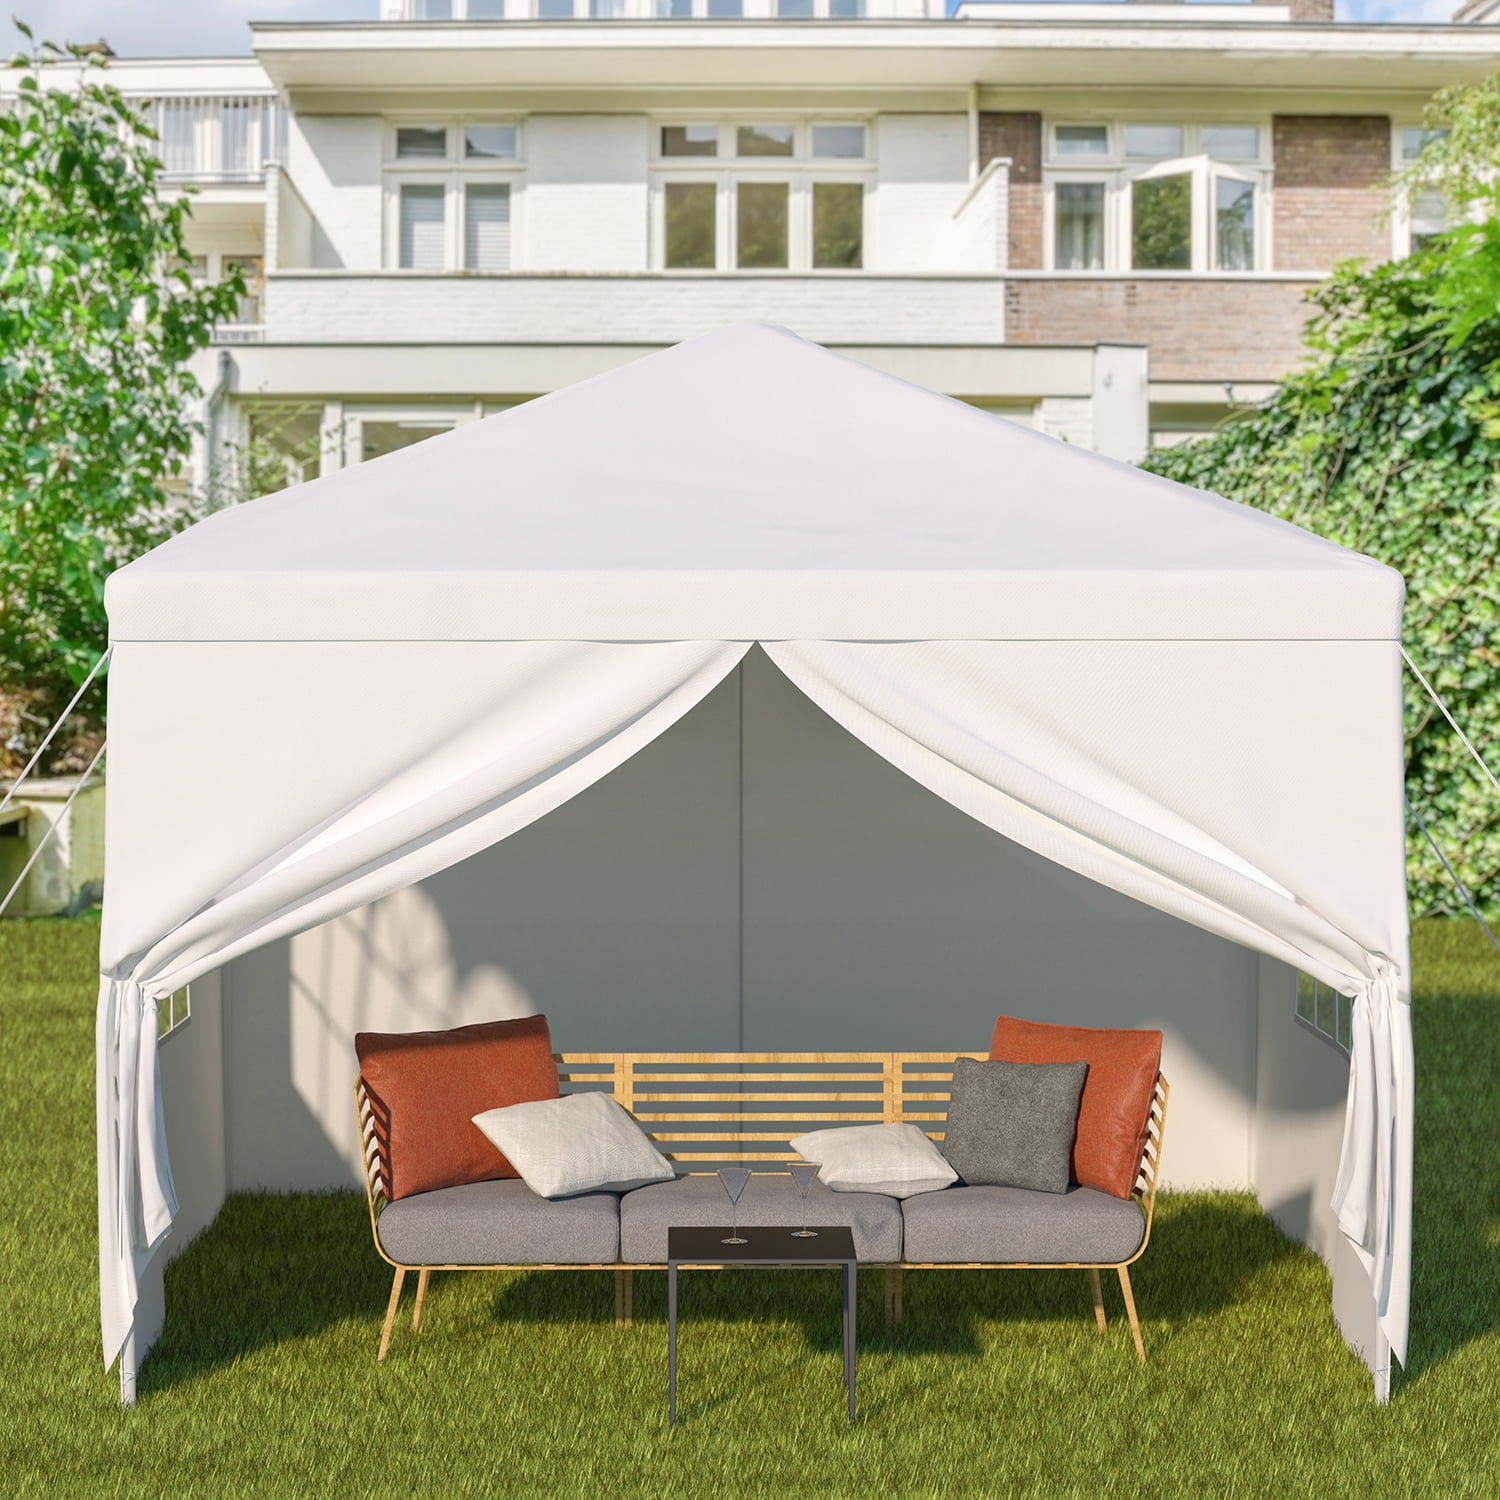 Gelukkig Ontleden ik zal sterk zijn Backyard Tent for Parties, White 10x10ft Wedding Party Tent Patio Gazebo  with 4 Removable Sidewalls, Canopy Tent for Camping Outside Party BBQ -  Walmart.com